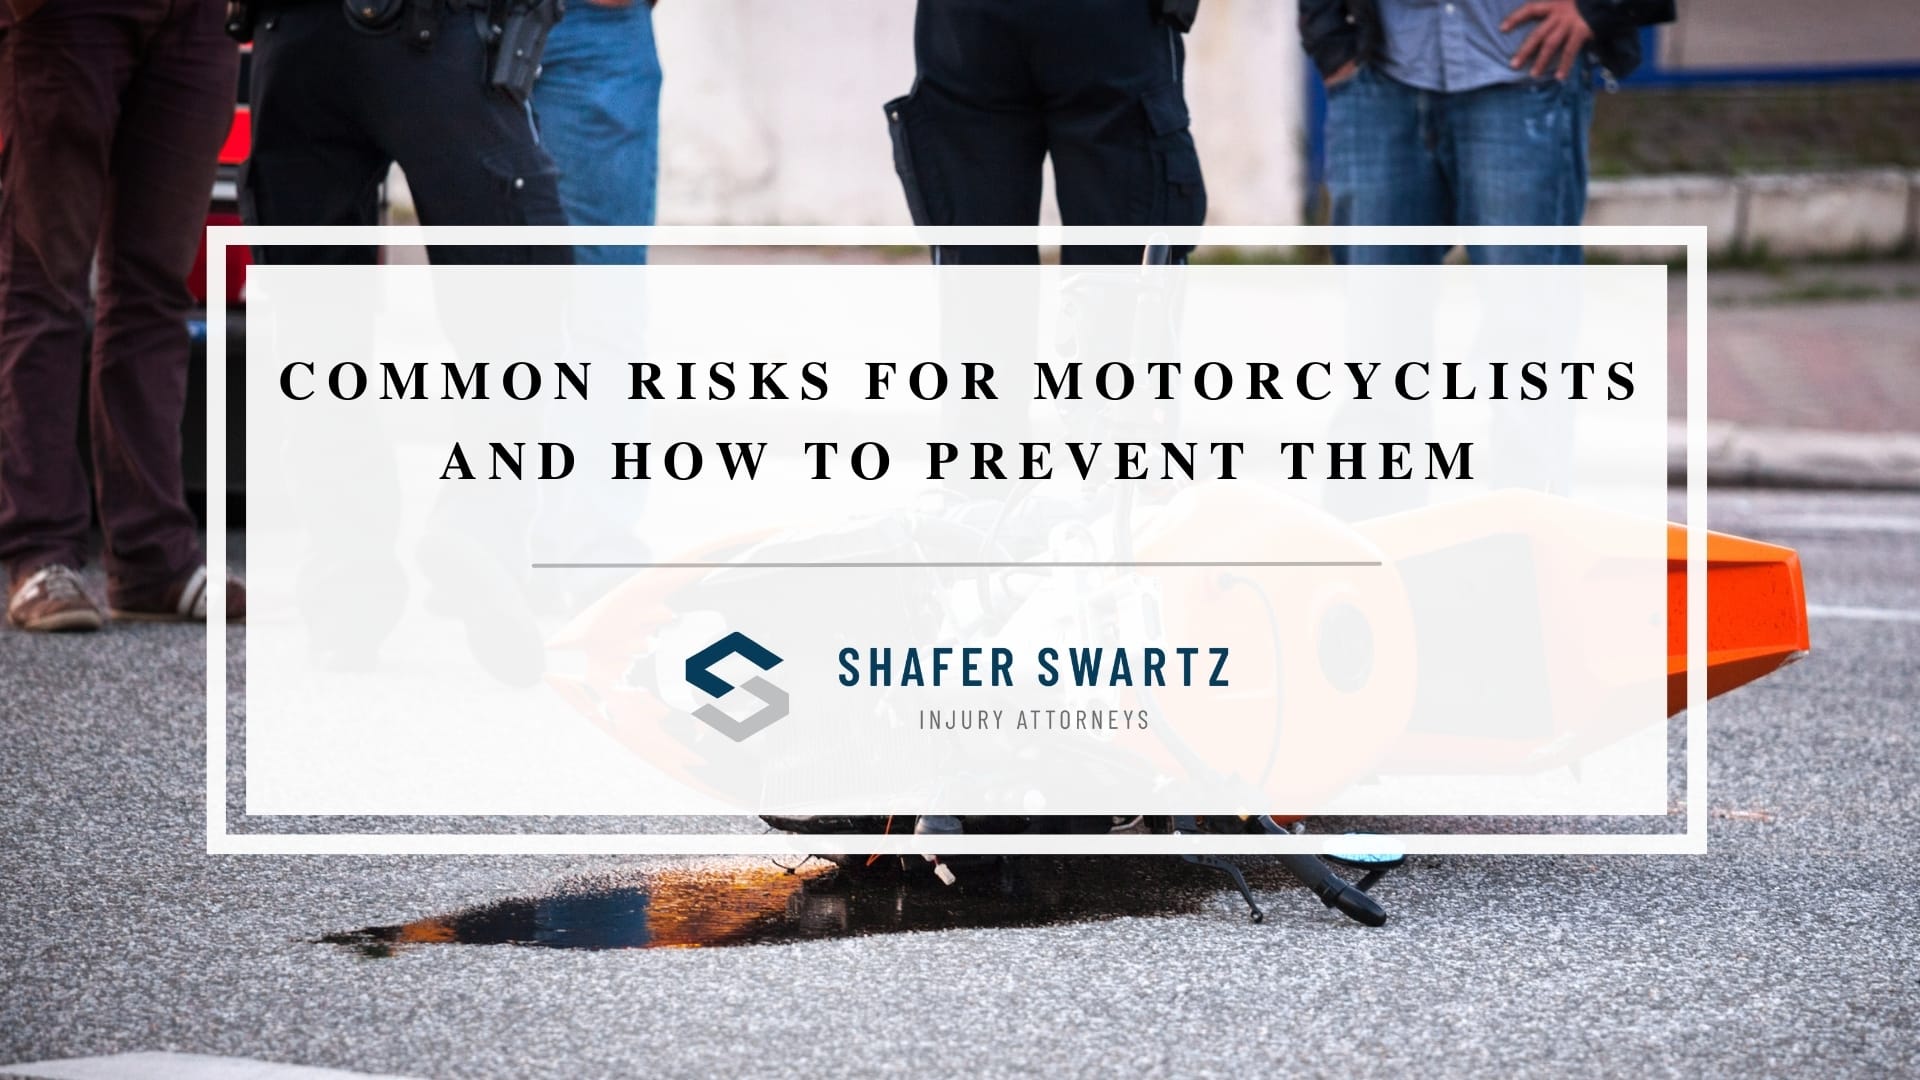 Featured image of common risks for motorcyclists and how to prevent them